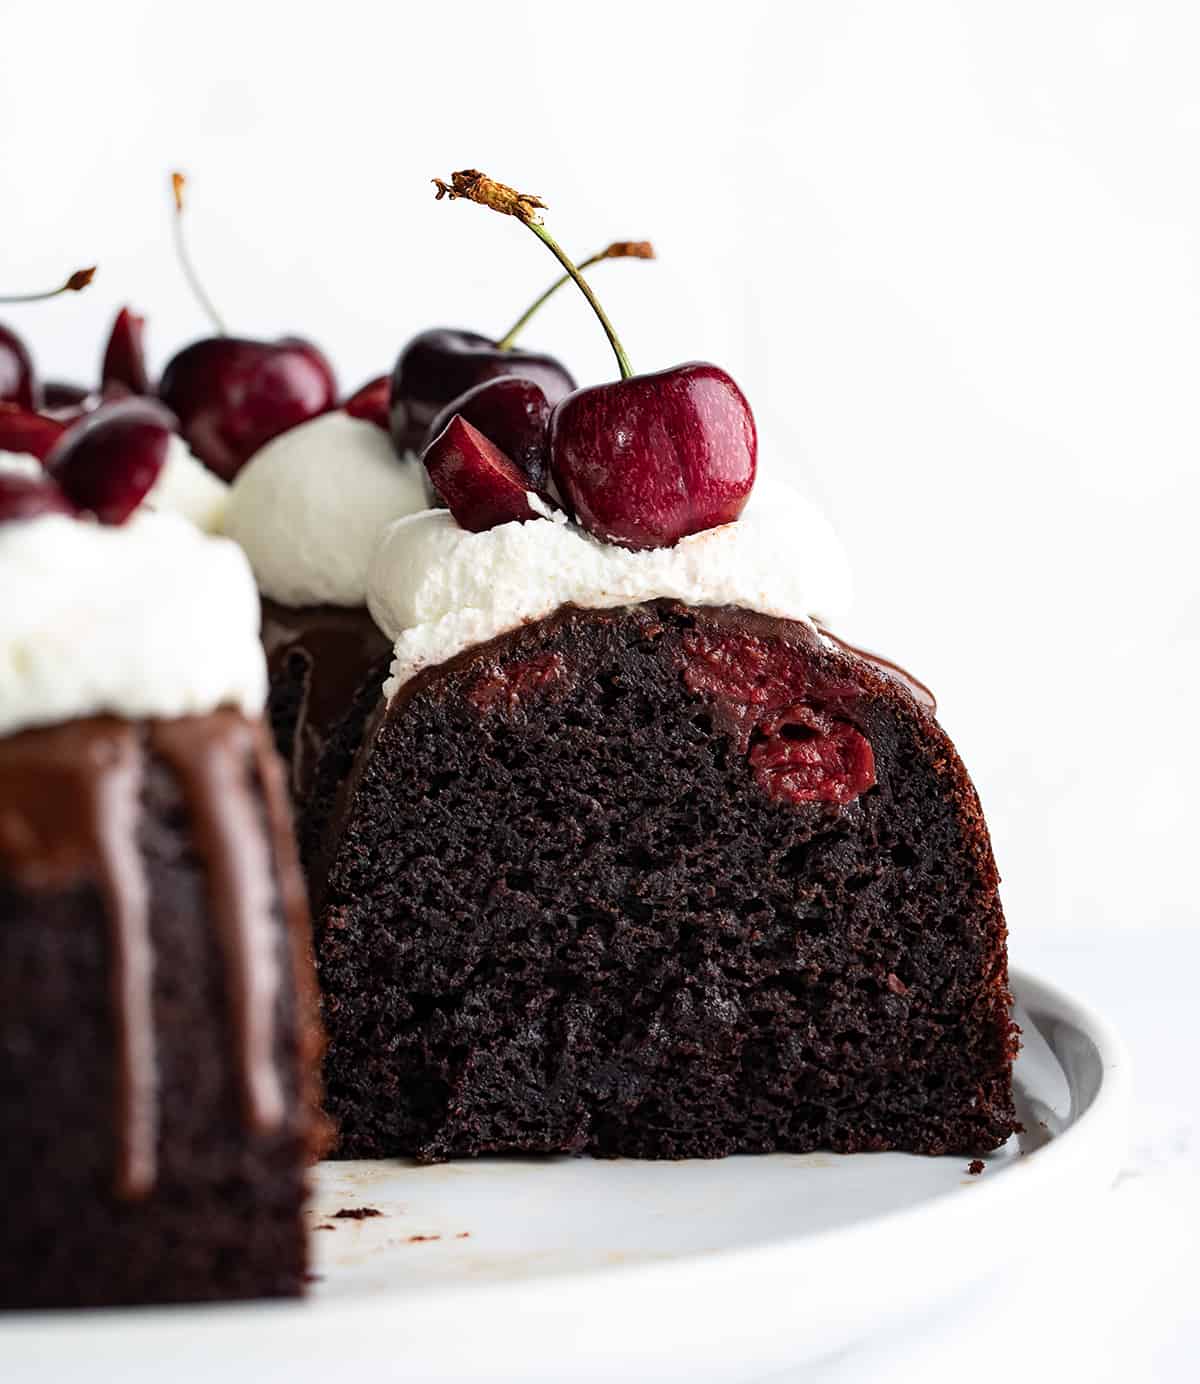 Black Forest Bundt Cake on a White Serving Platter with Pieces Removed Showing Inside Texture.